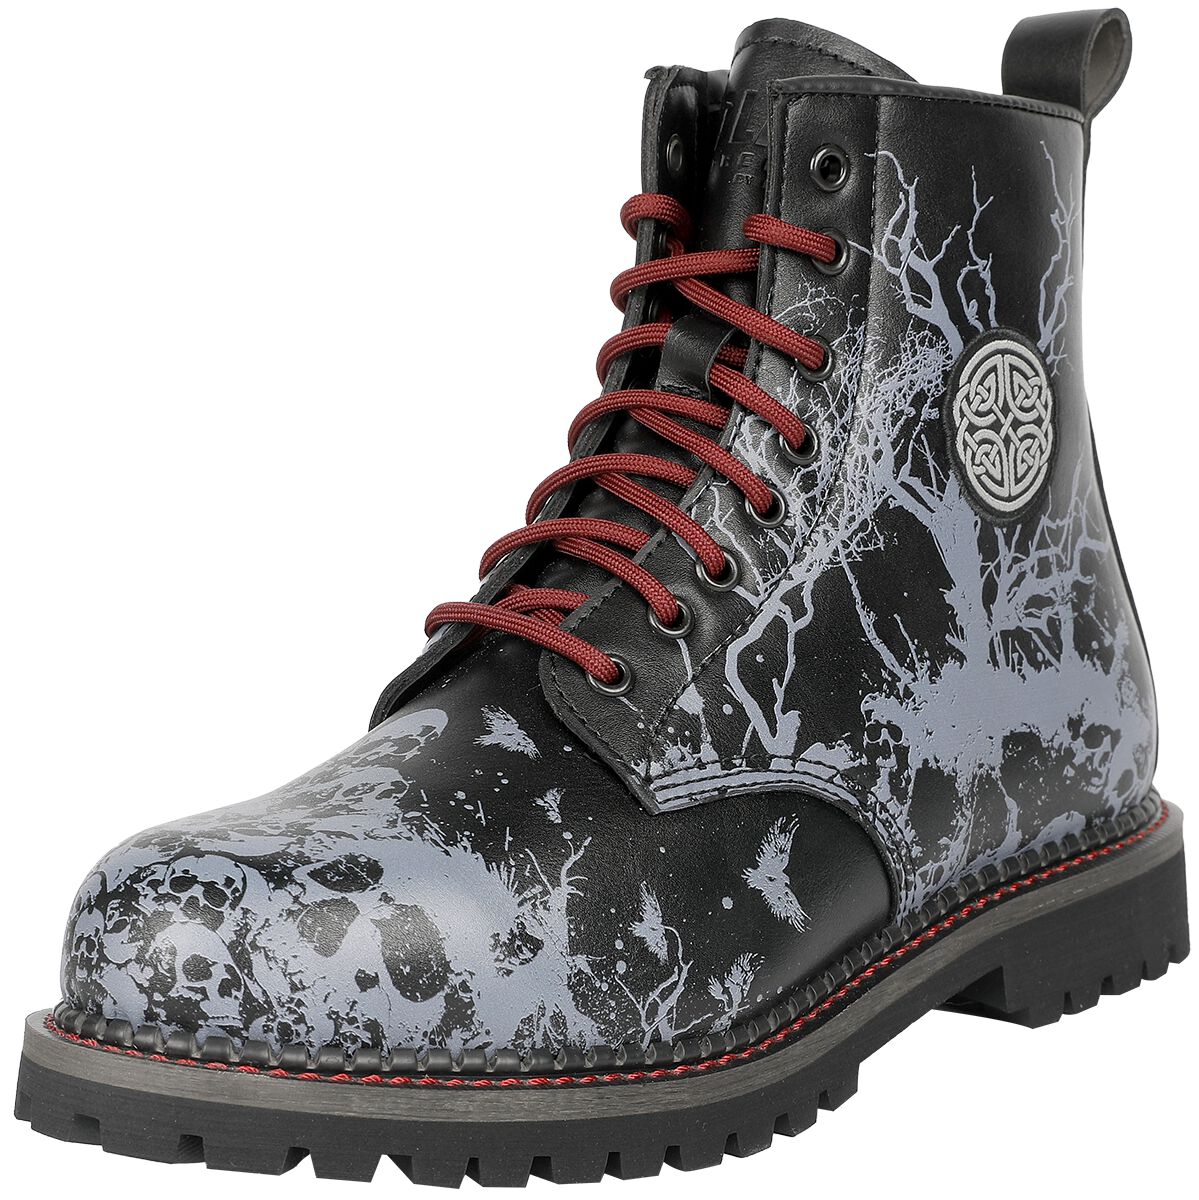 Black Premium by EMP Boots with Skull Alloverprint and Red Details Stiefel schwarz grau in EU41